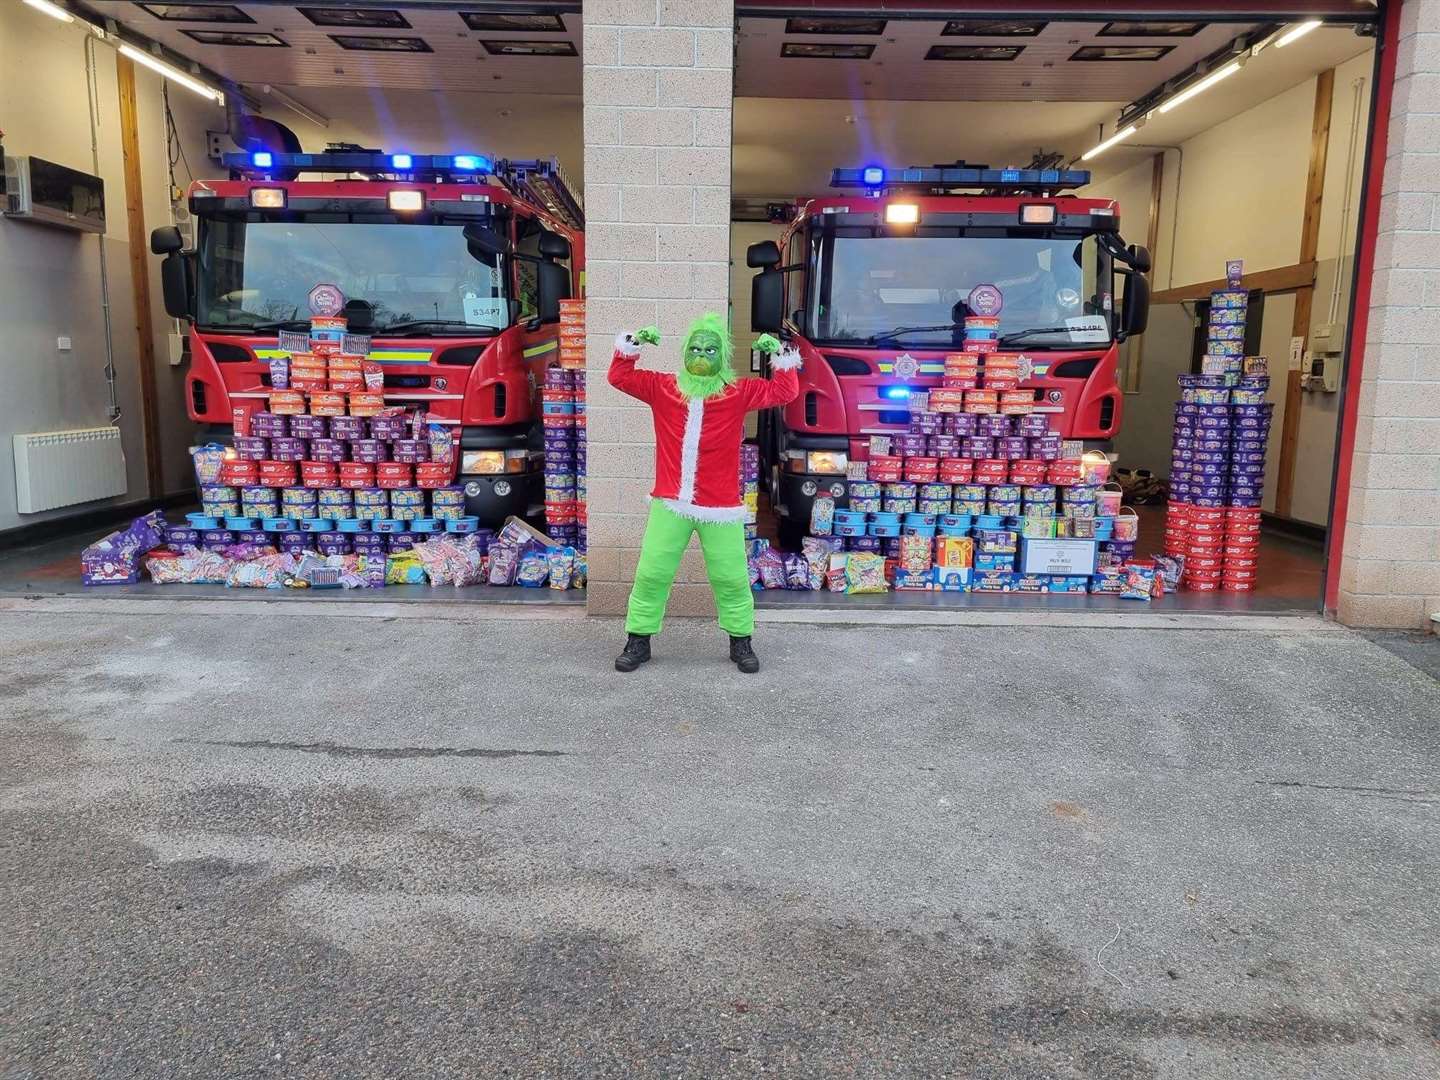 The Grinch at Nairn Fire Station